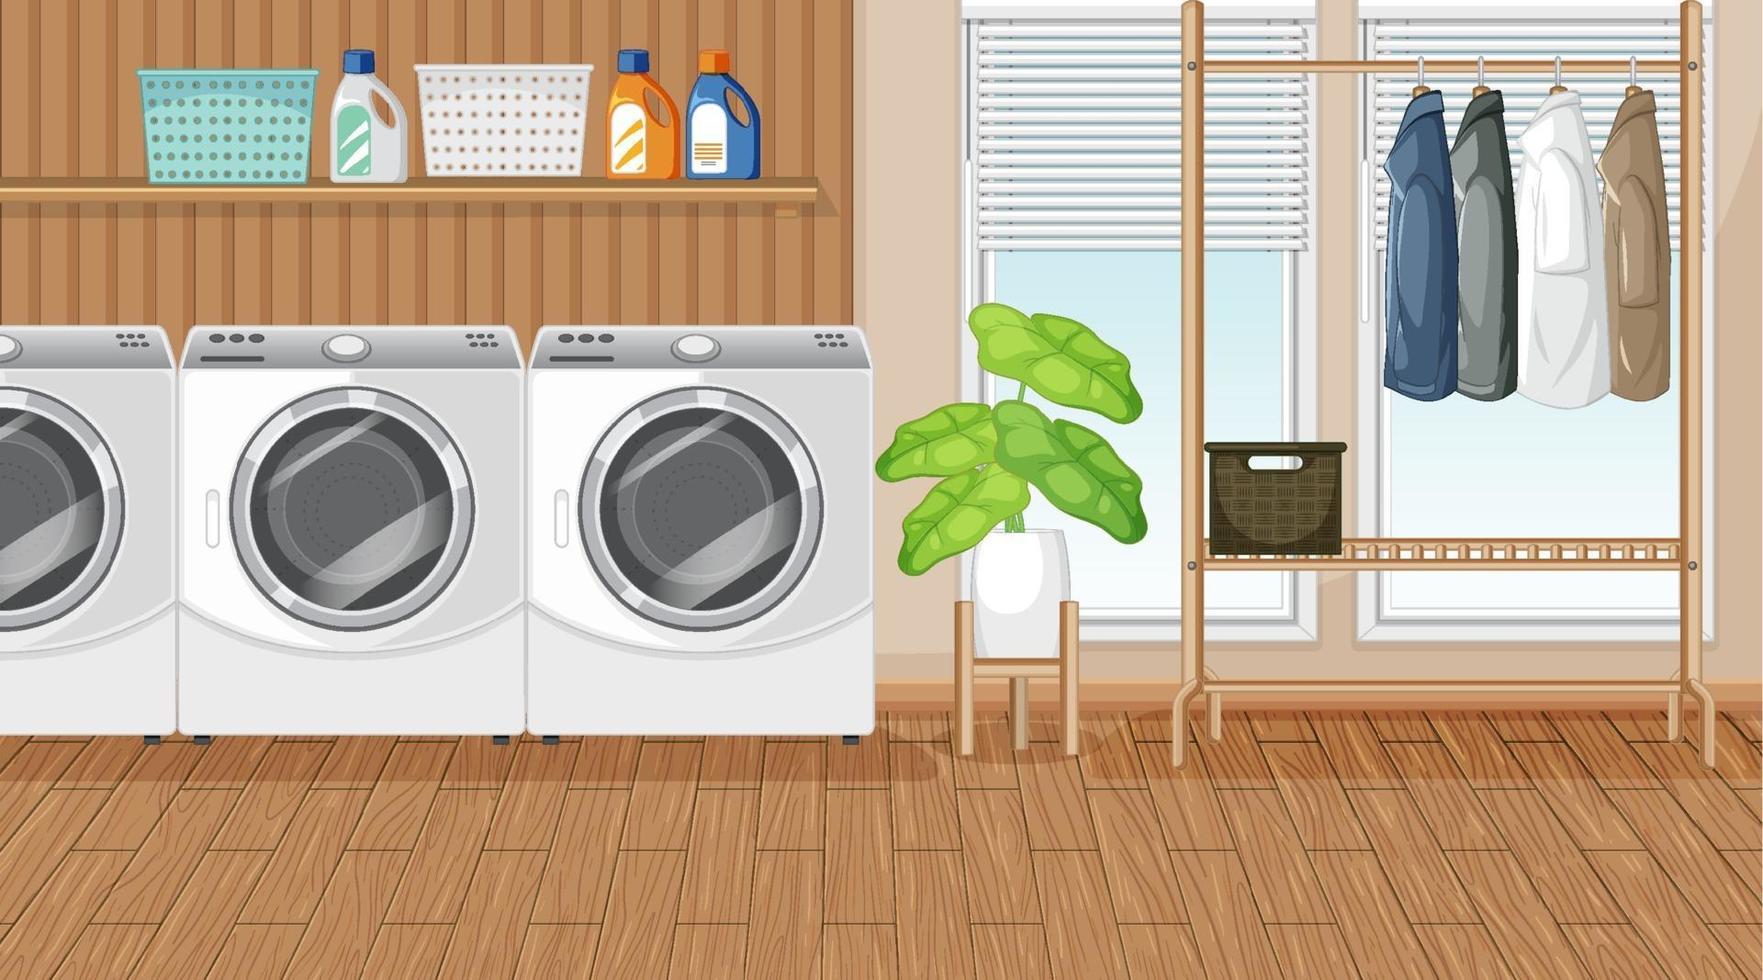 Laundry room scene with washing machine and clothes hanger vector